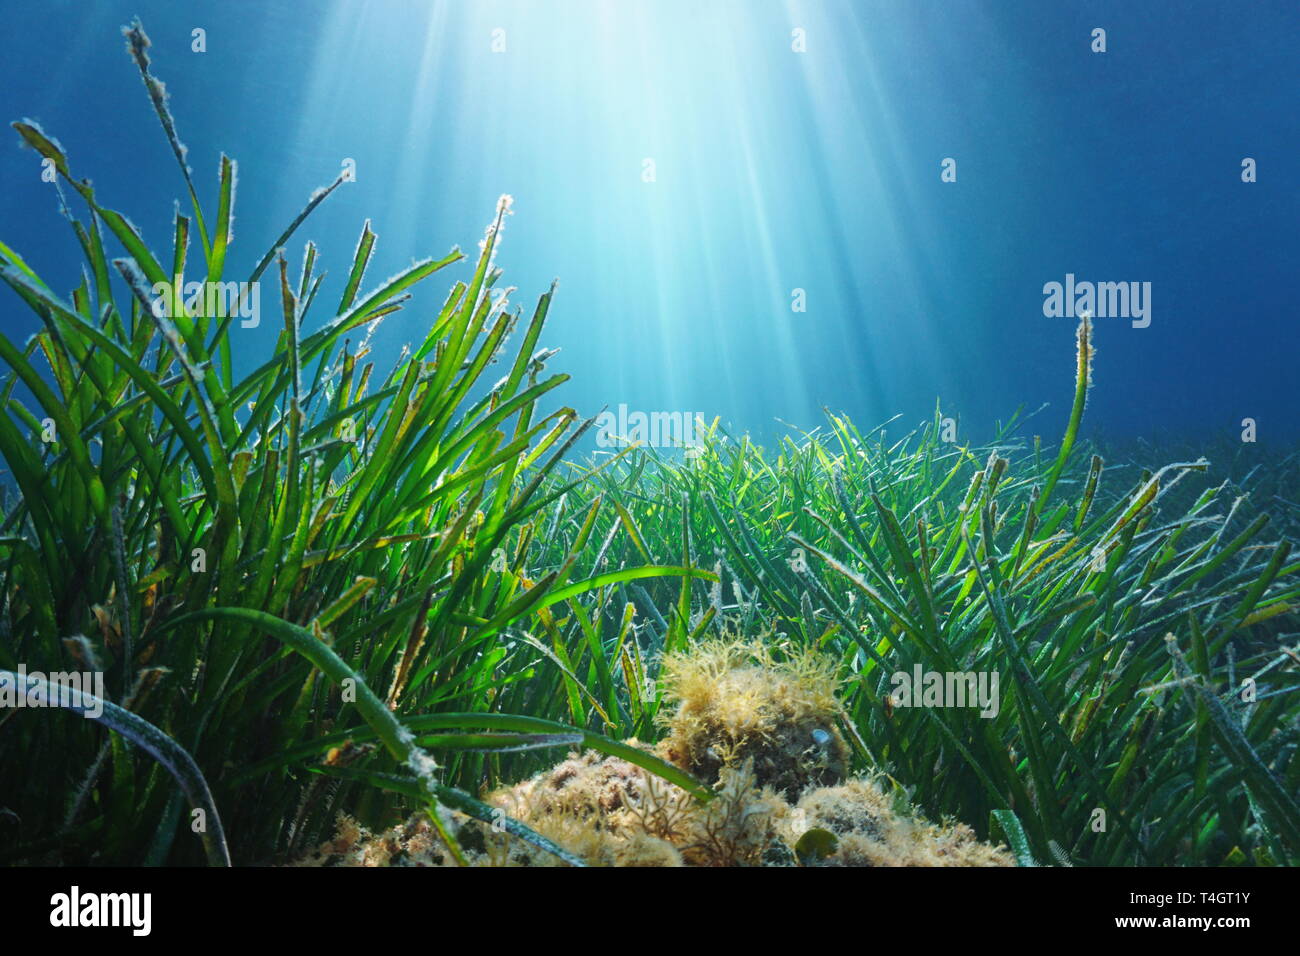 Neptune seagrass Posidonia oceanica underwater with natural sunlight in Mediterranean sea, France Stock Photo